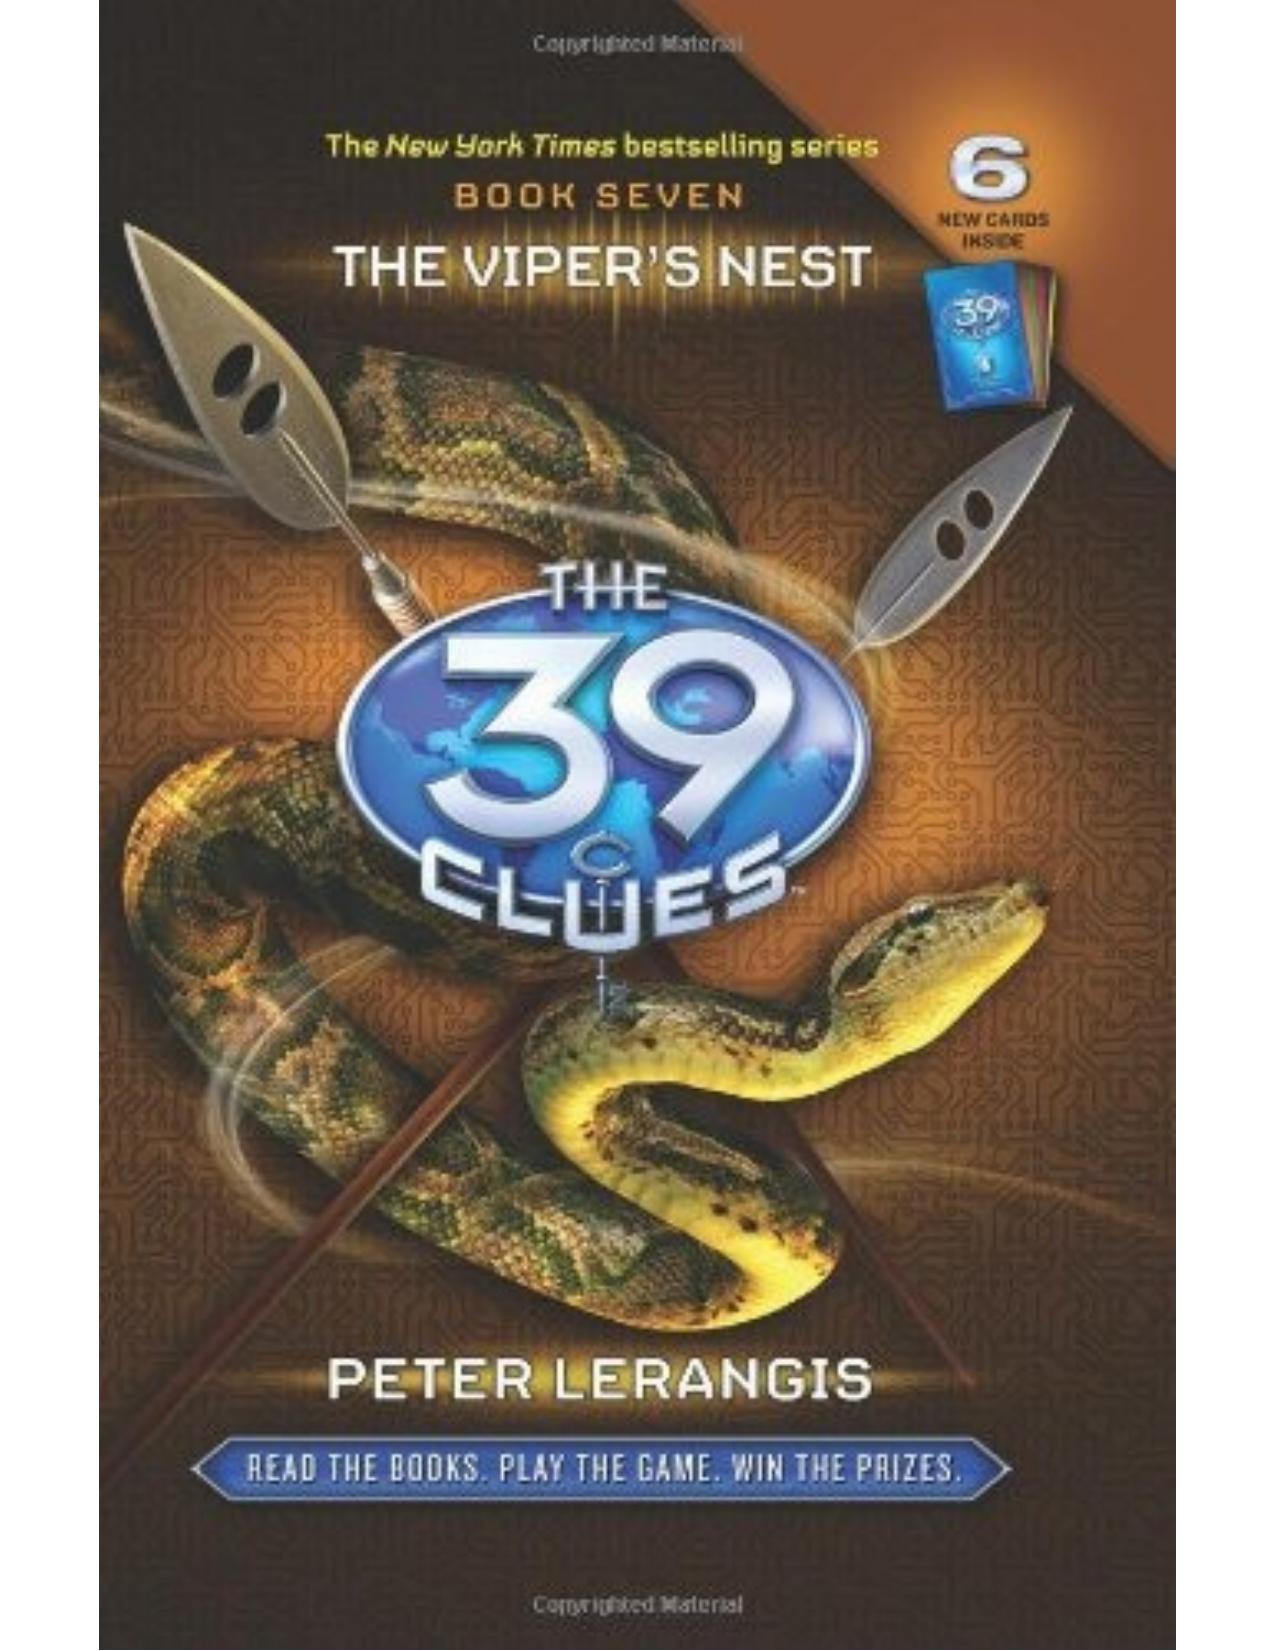 The 39 Clues Book 7: The Viper's Nest by Peter Lerangis